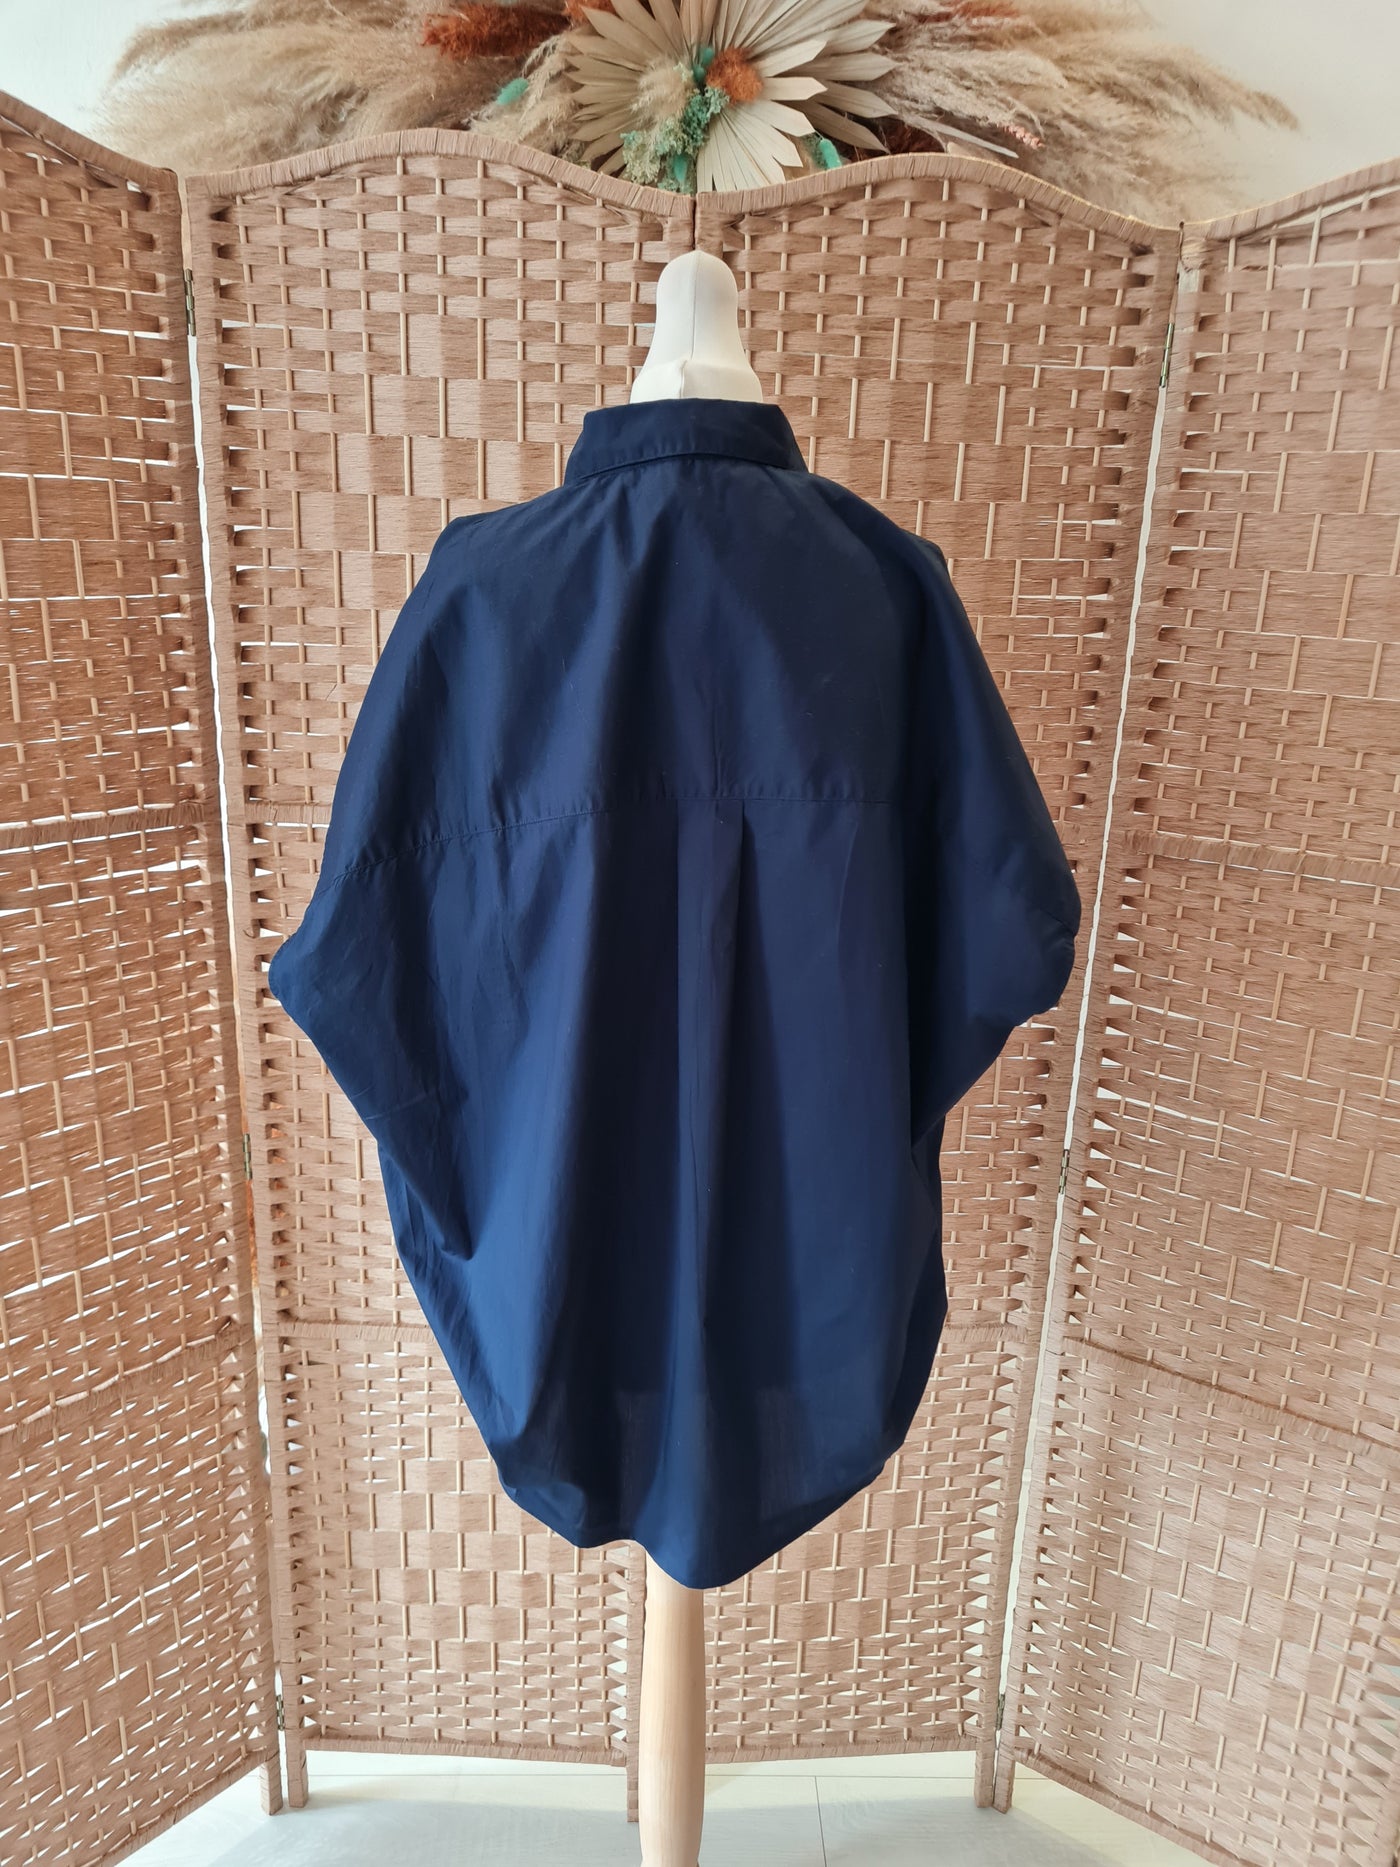 French Connection Navy Shirt S RRP £35